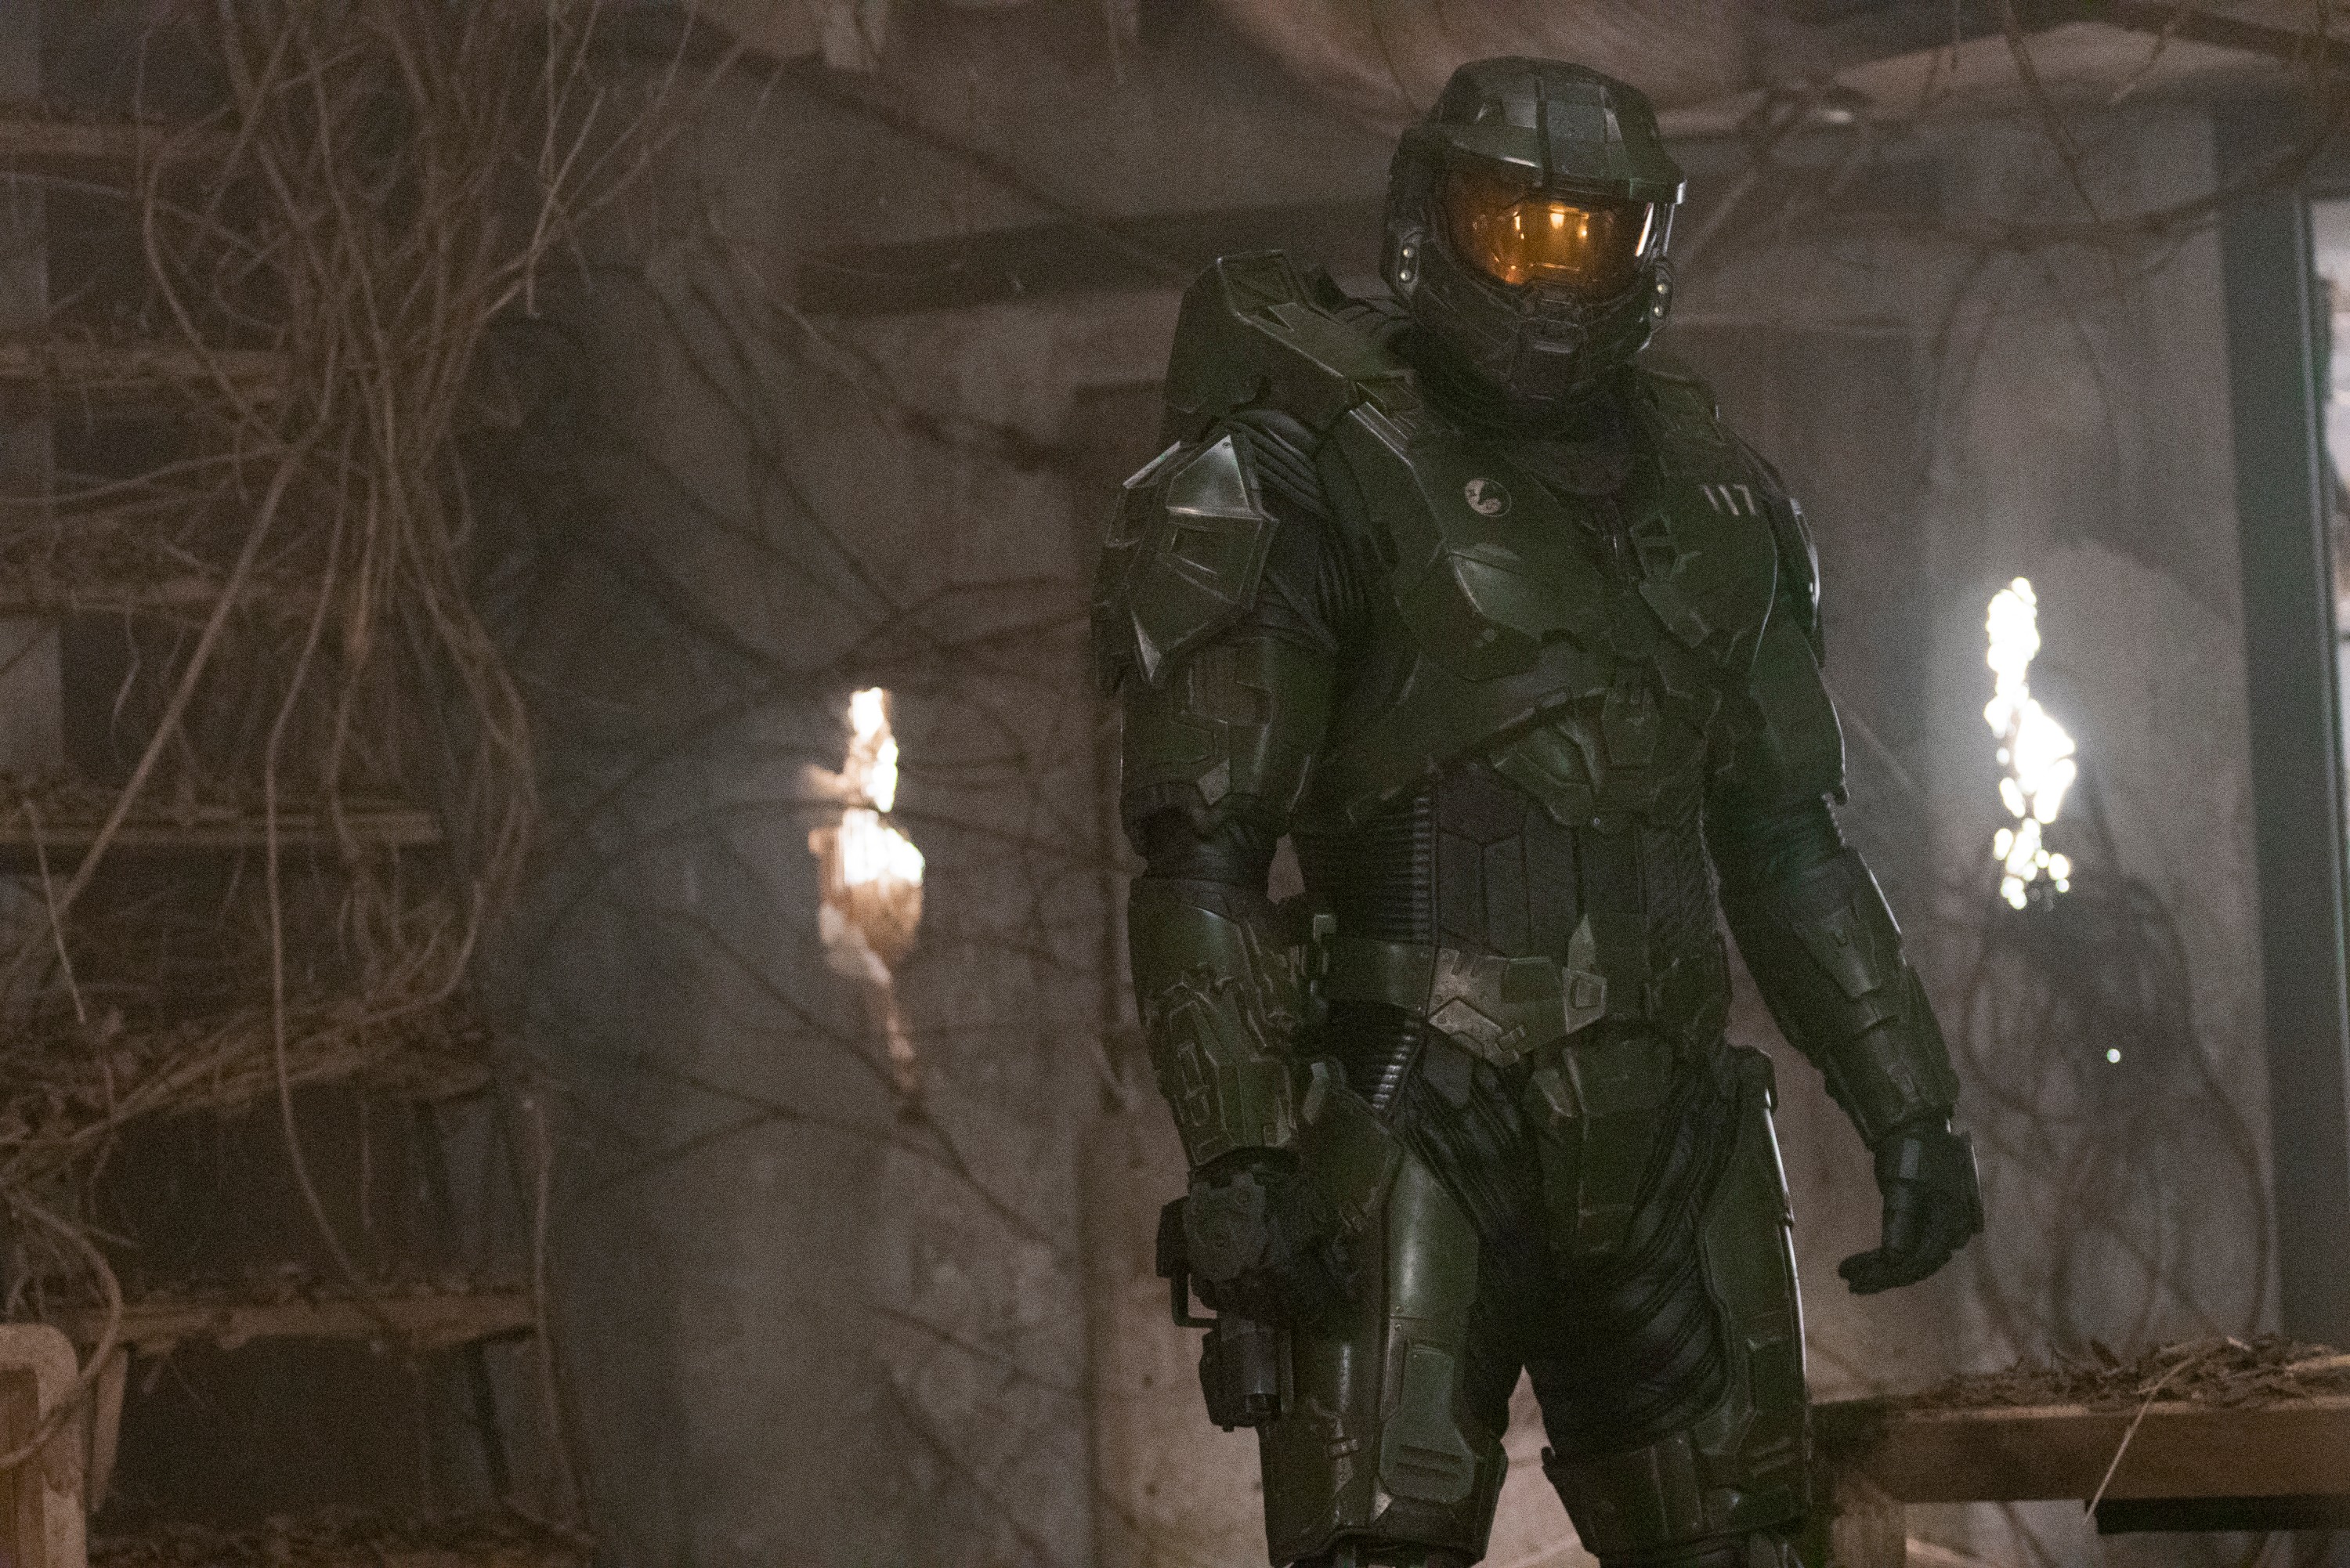 The Halo TV series has finished assembling its cast with John and Miranda  Keyes